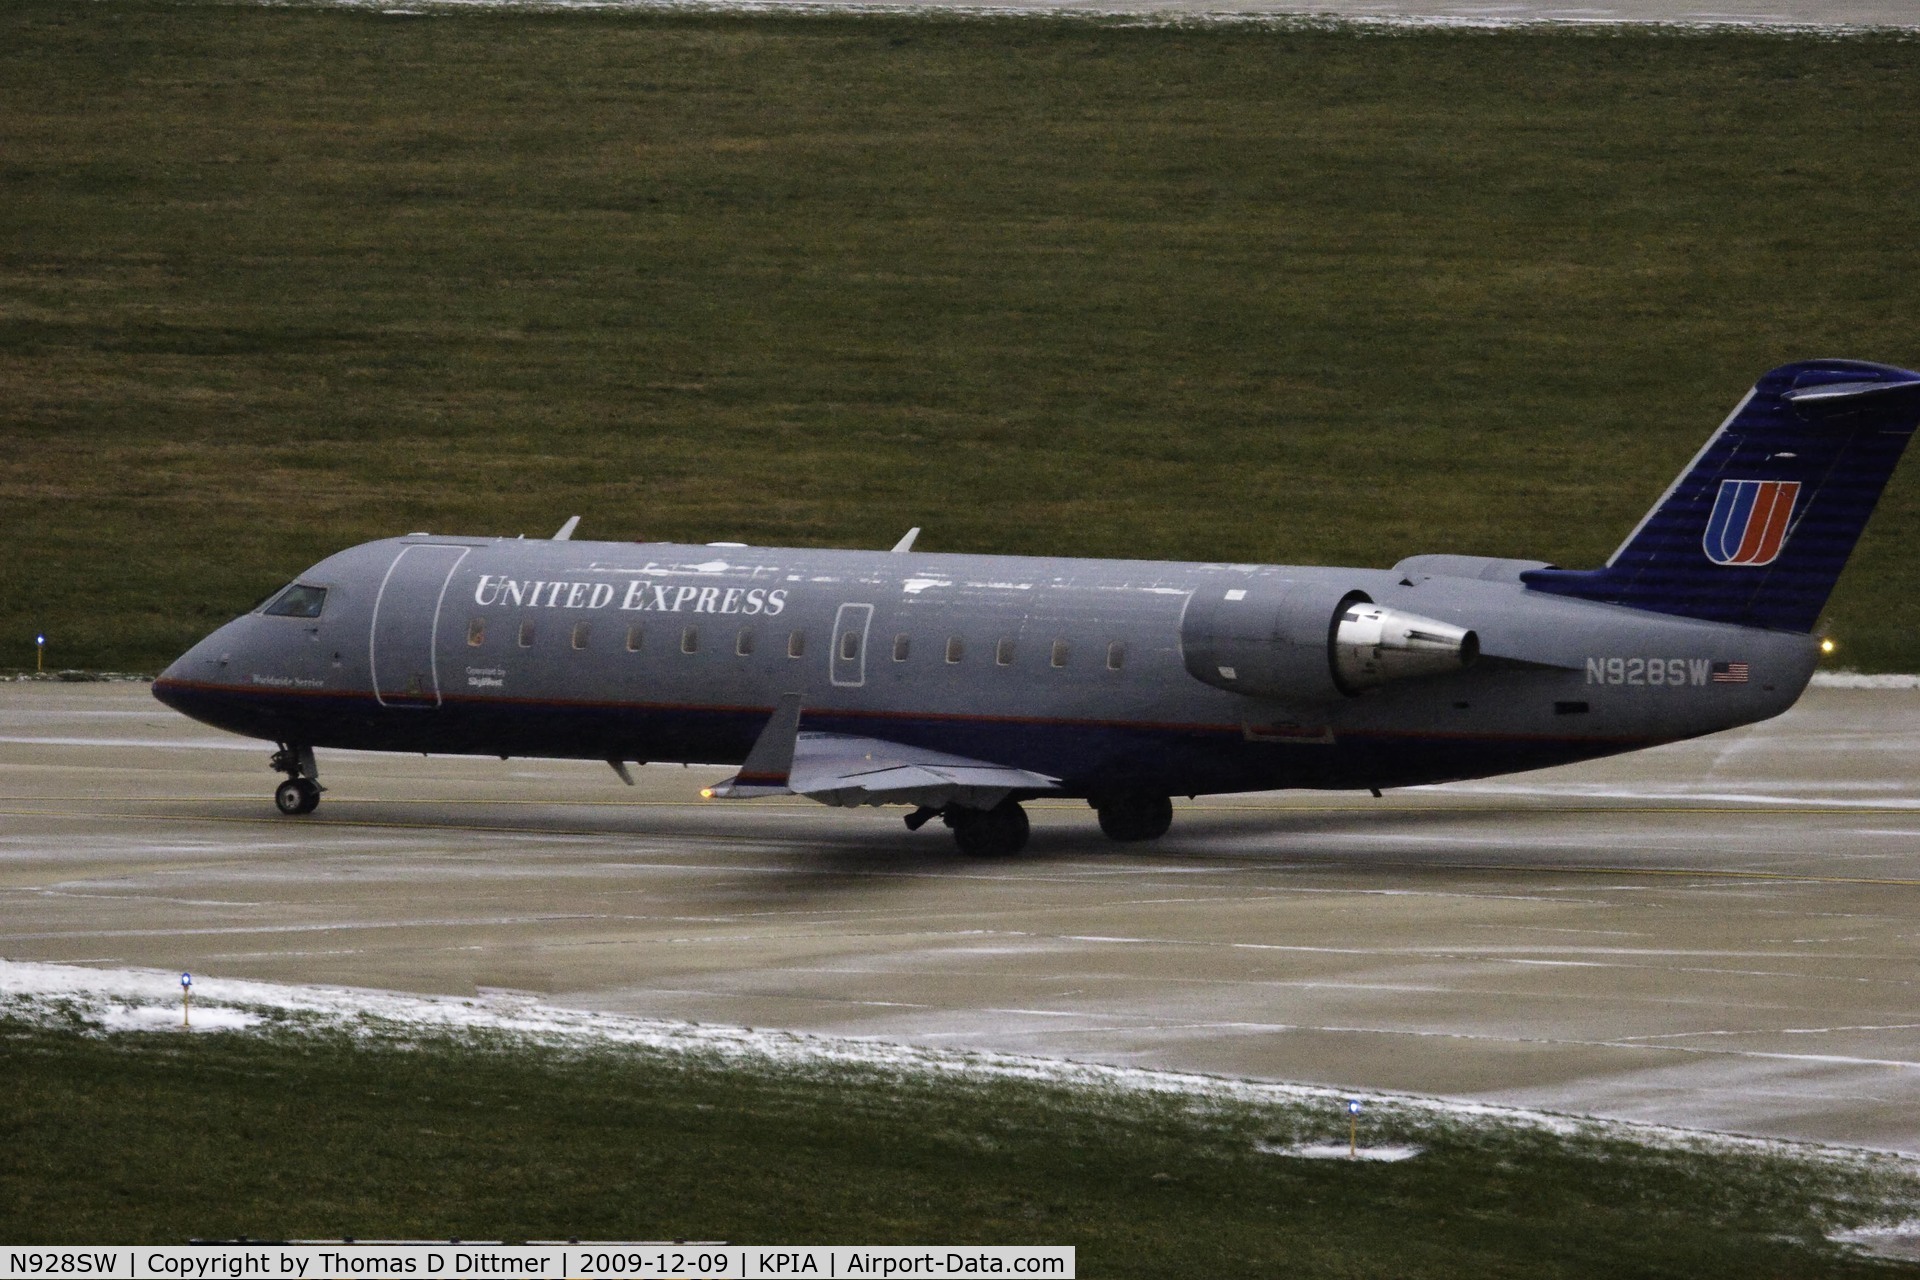 N928SW, 2002 Bombardier CRJ-200LR (CL-600-2B19) C/N 7701, United Express (N928SW) taxies to the runway for departure